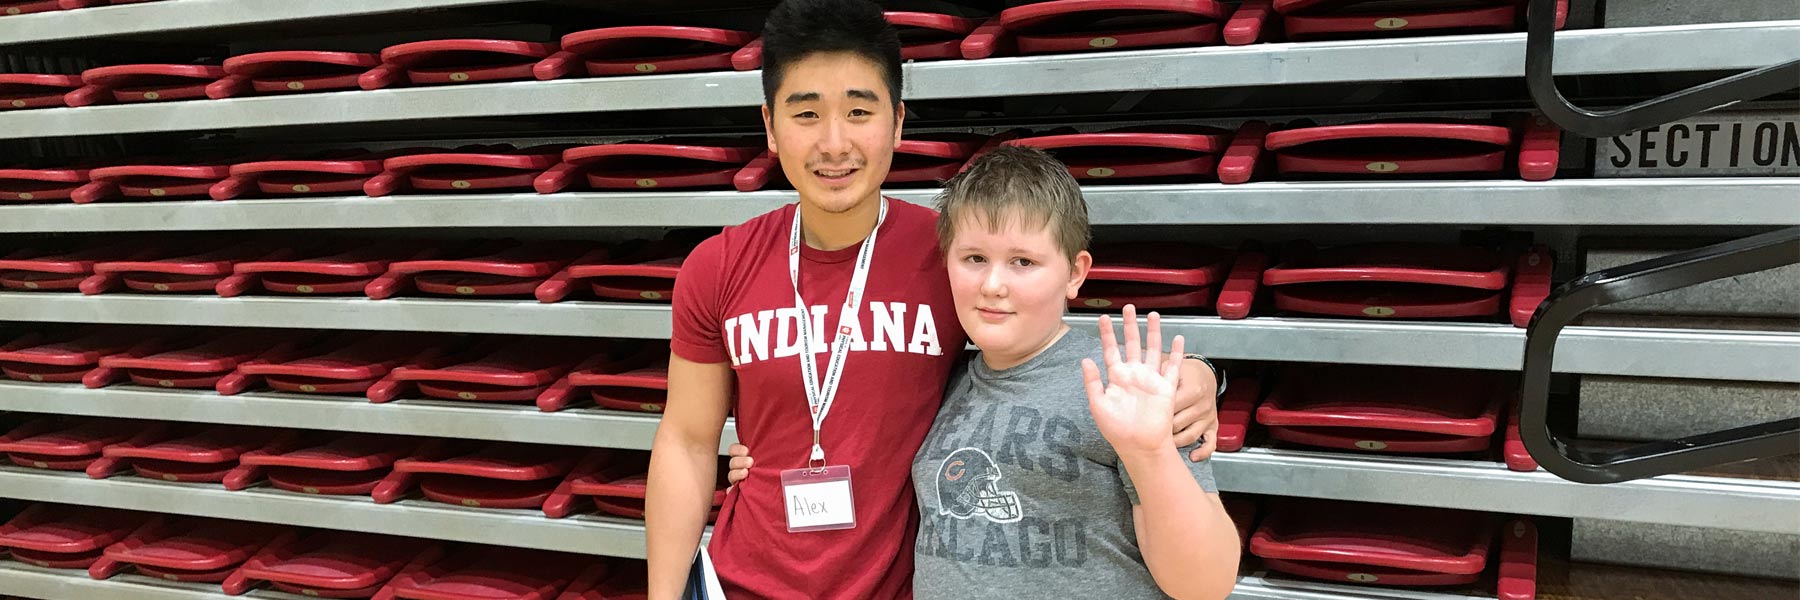 A male AMP instructor in an IU t-shirt poses with his client, an elementary-aged boy waving at camera